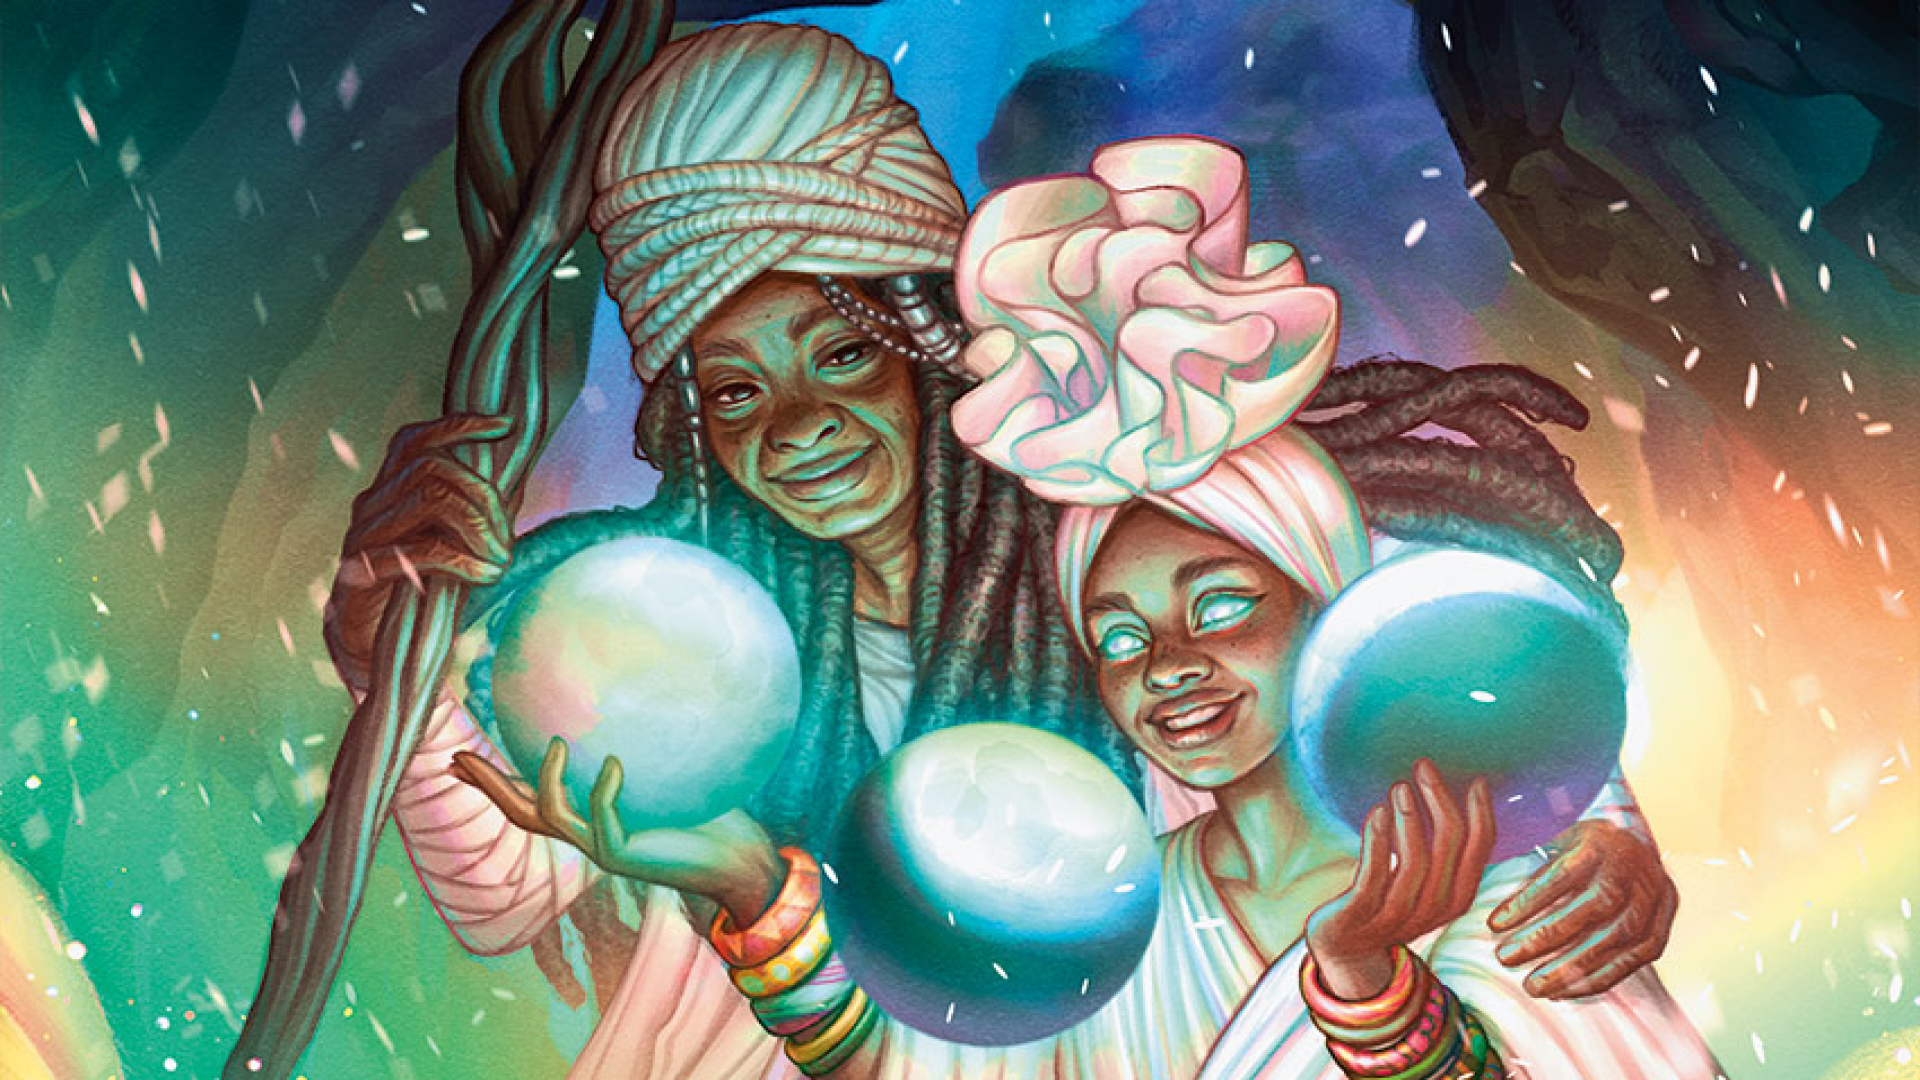 Image for Magic: The Gathering’s next Secret Lair features alternate art by Black artists